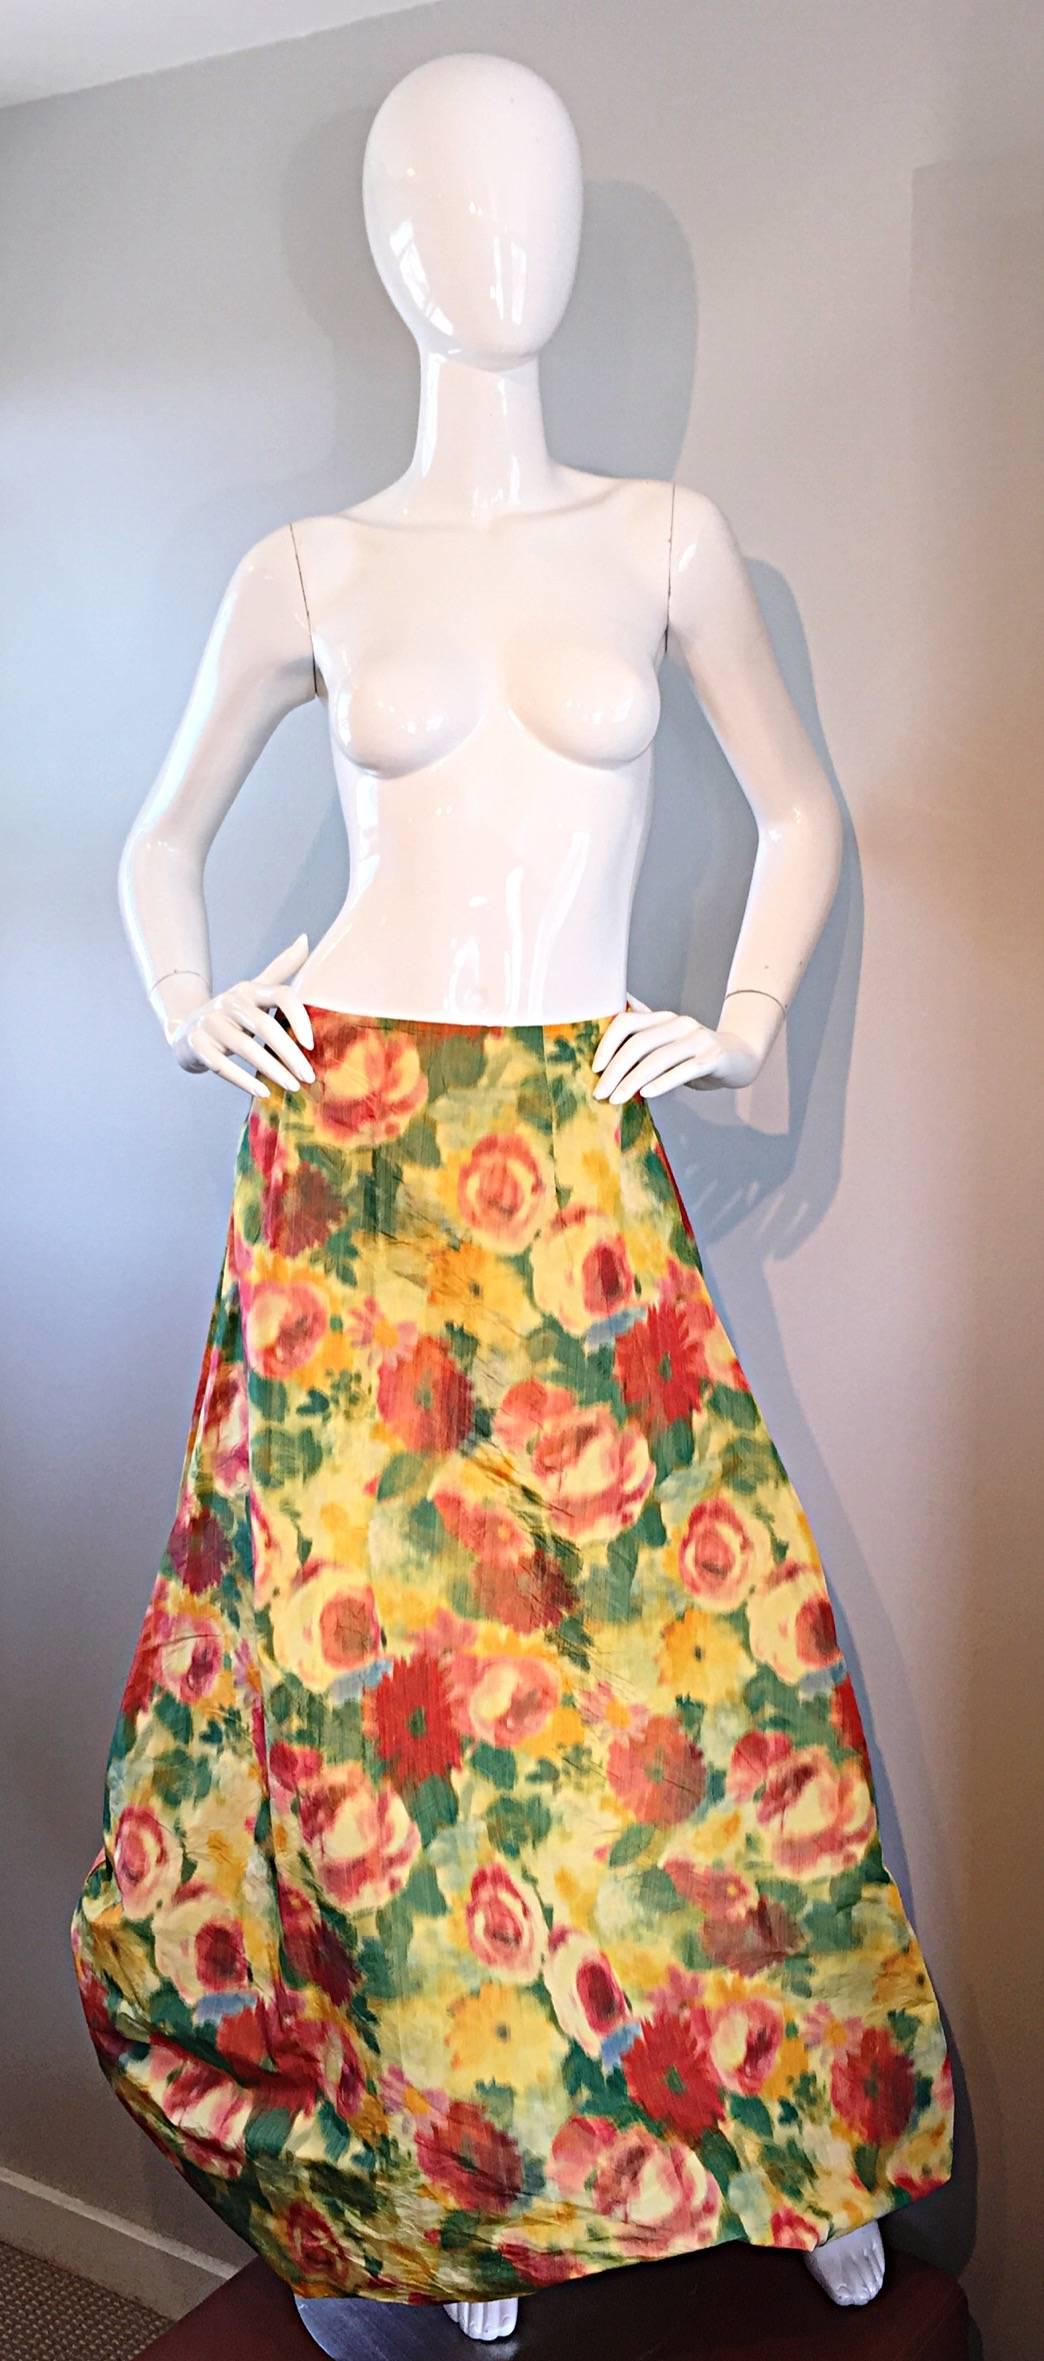 Beautiful vintage bubble maxi skirt! Features flowers printed throughout that looks like a watercolor painting. Hidden zipper up the back, on what feels like a silk taffeta. Impeccable construction. The possibilities are endless with this beauty!